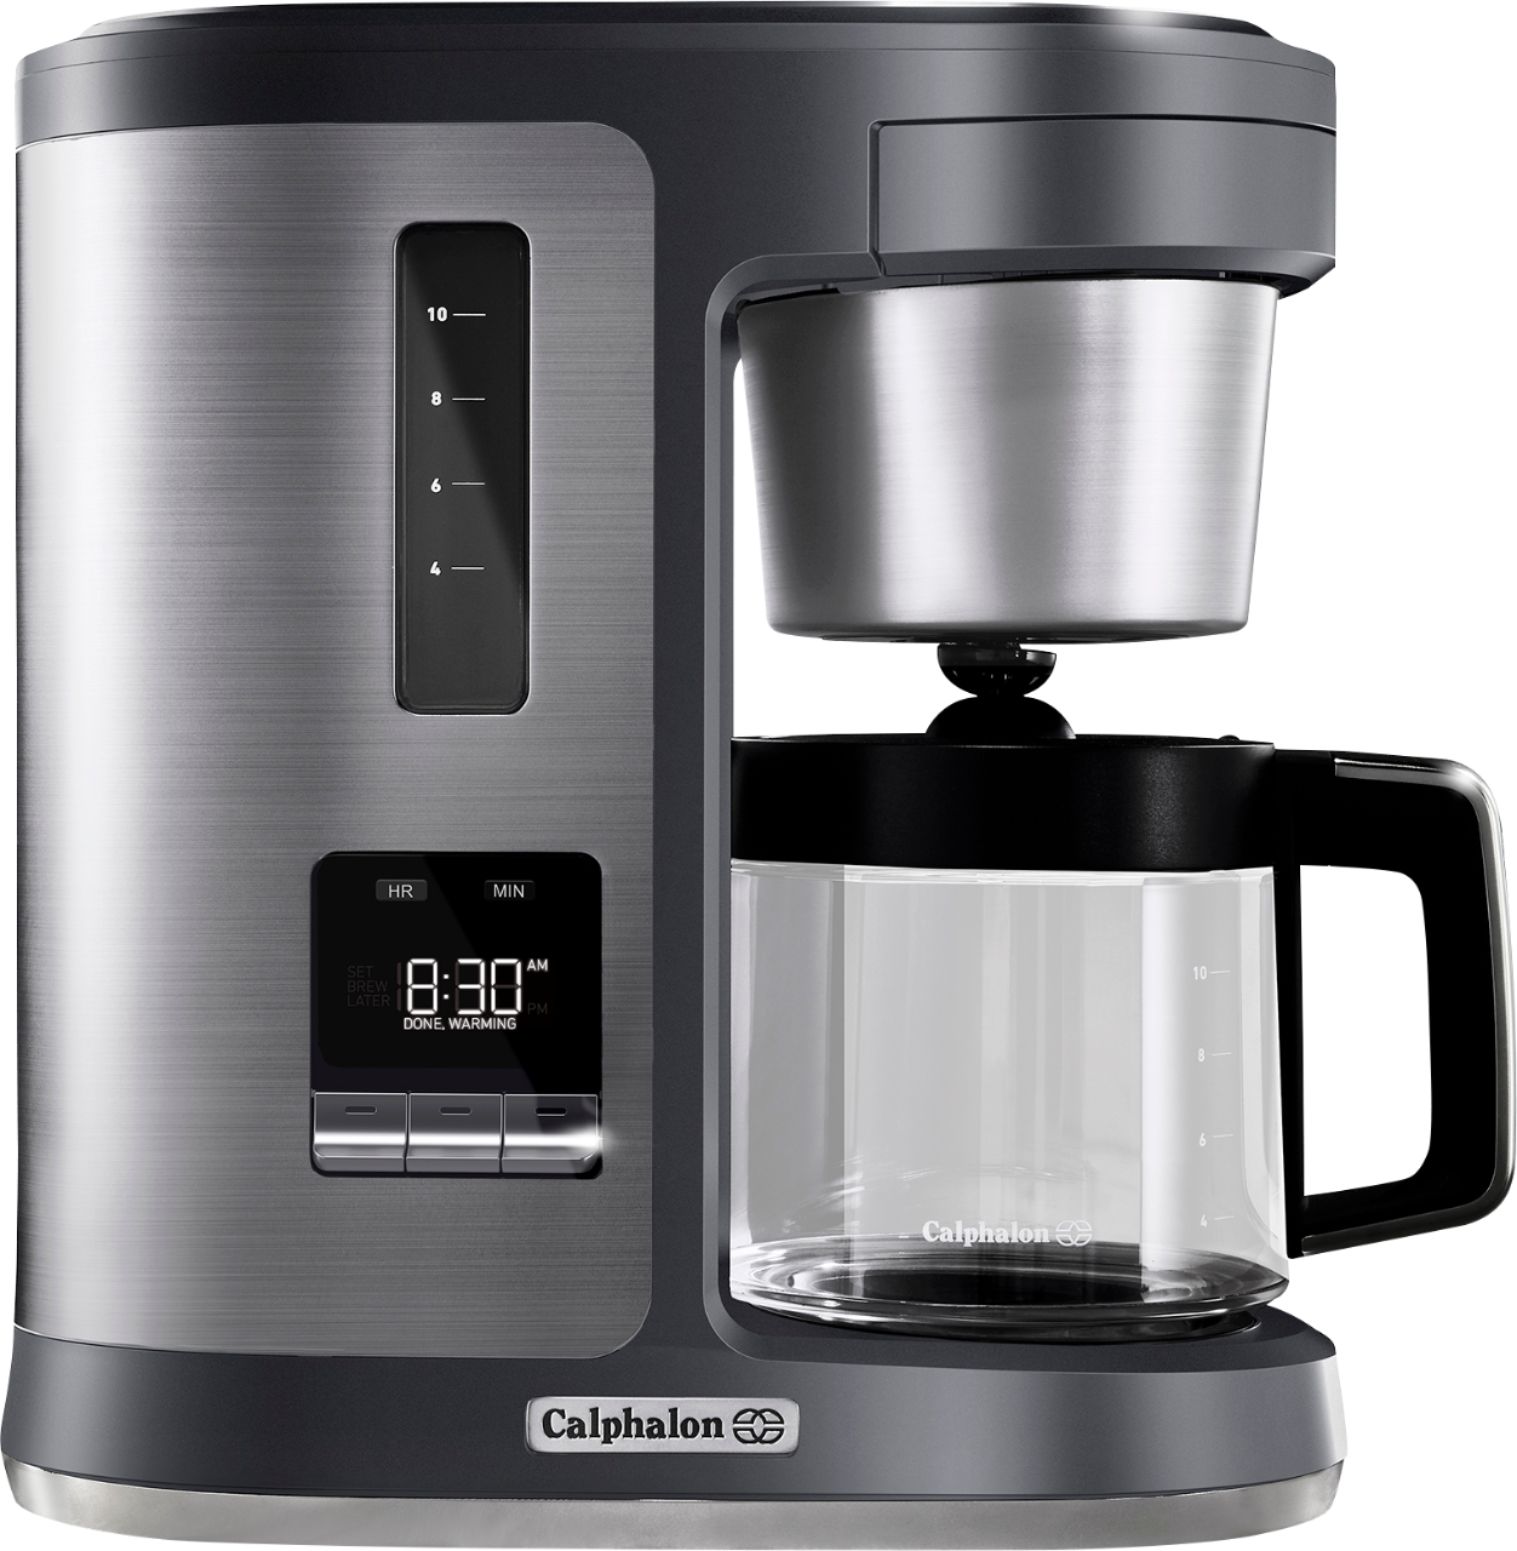 Calphalon - Special Brew 10-Cup Coffee Maker - Dark Stainless Steel